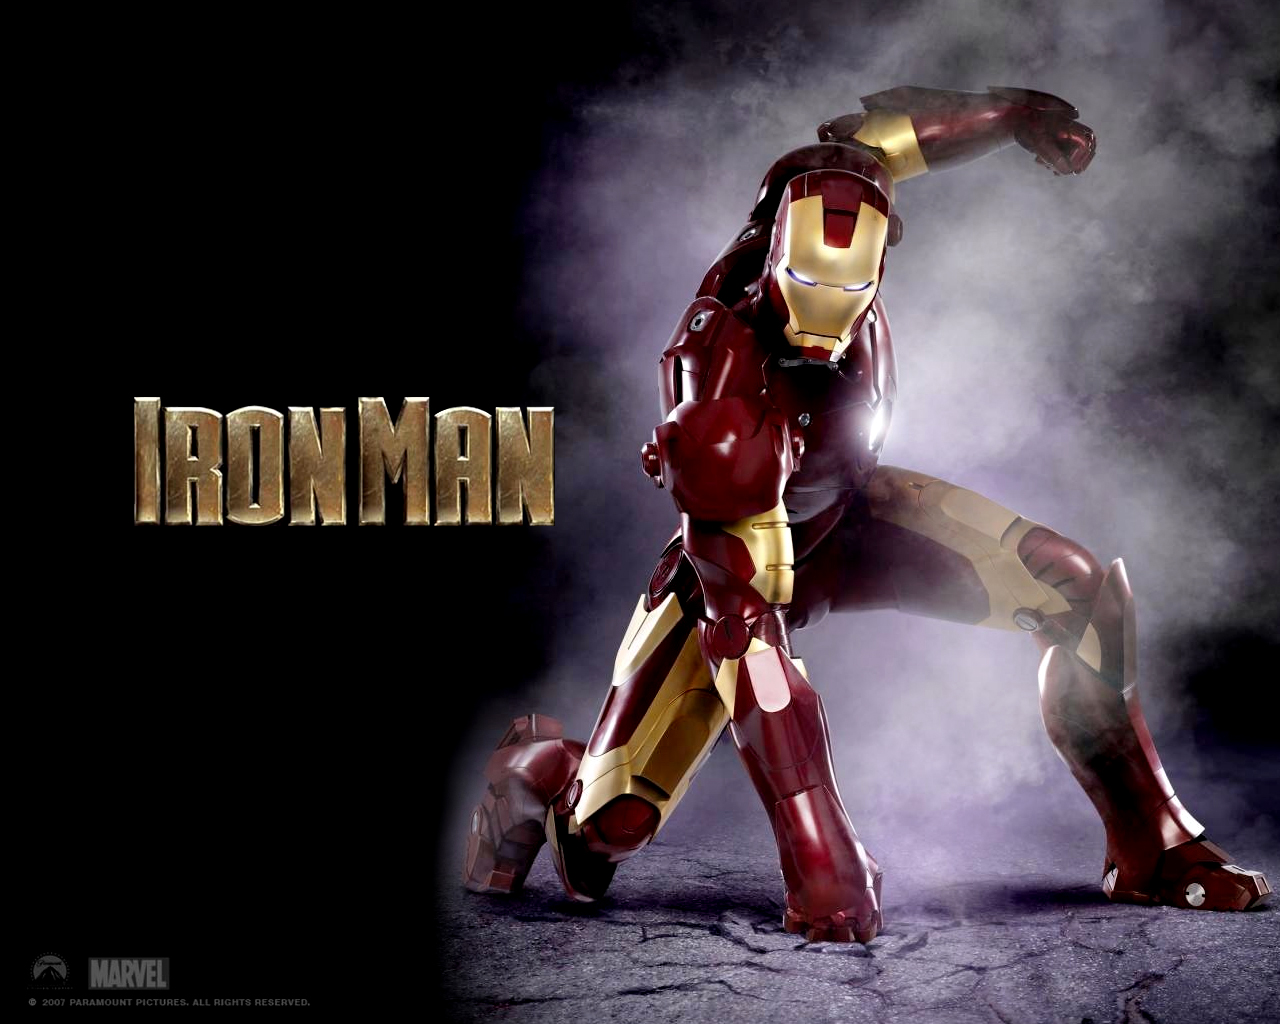 Iron Man Movie Wallpaper Toywiz S All About